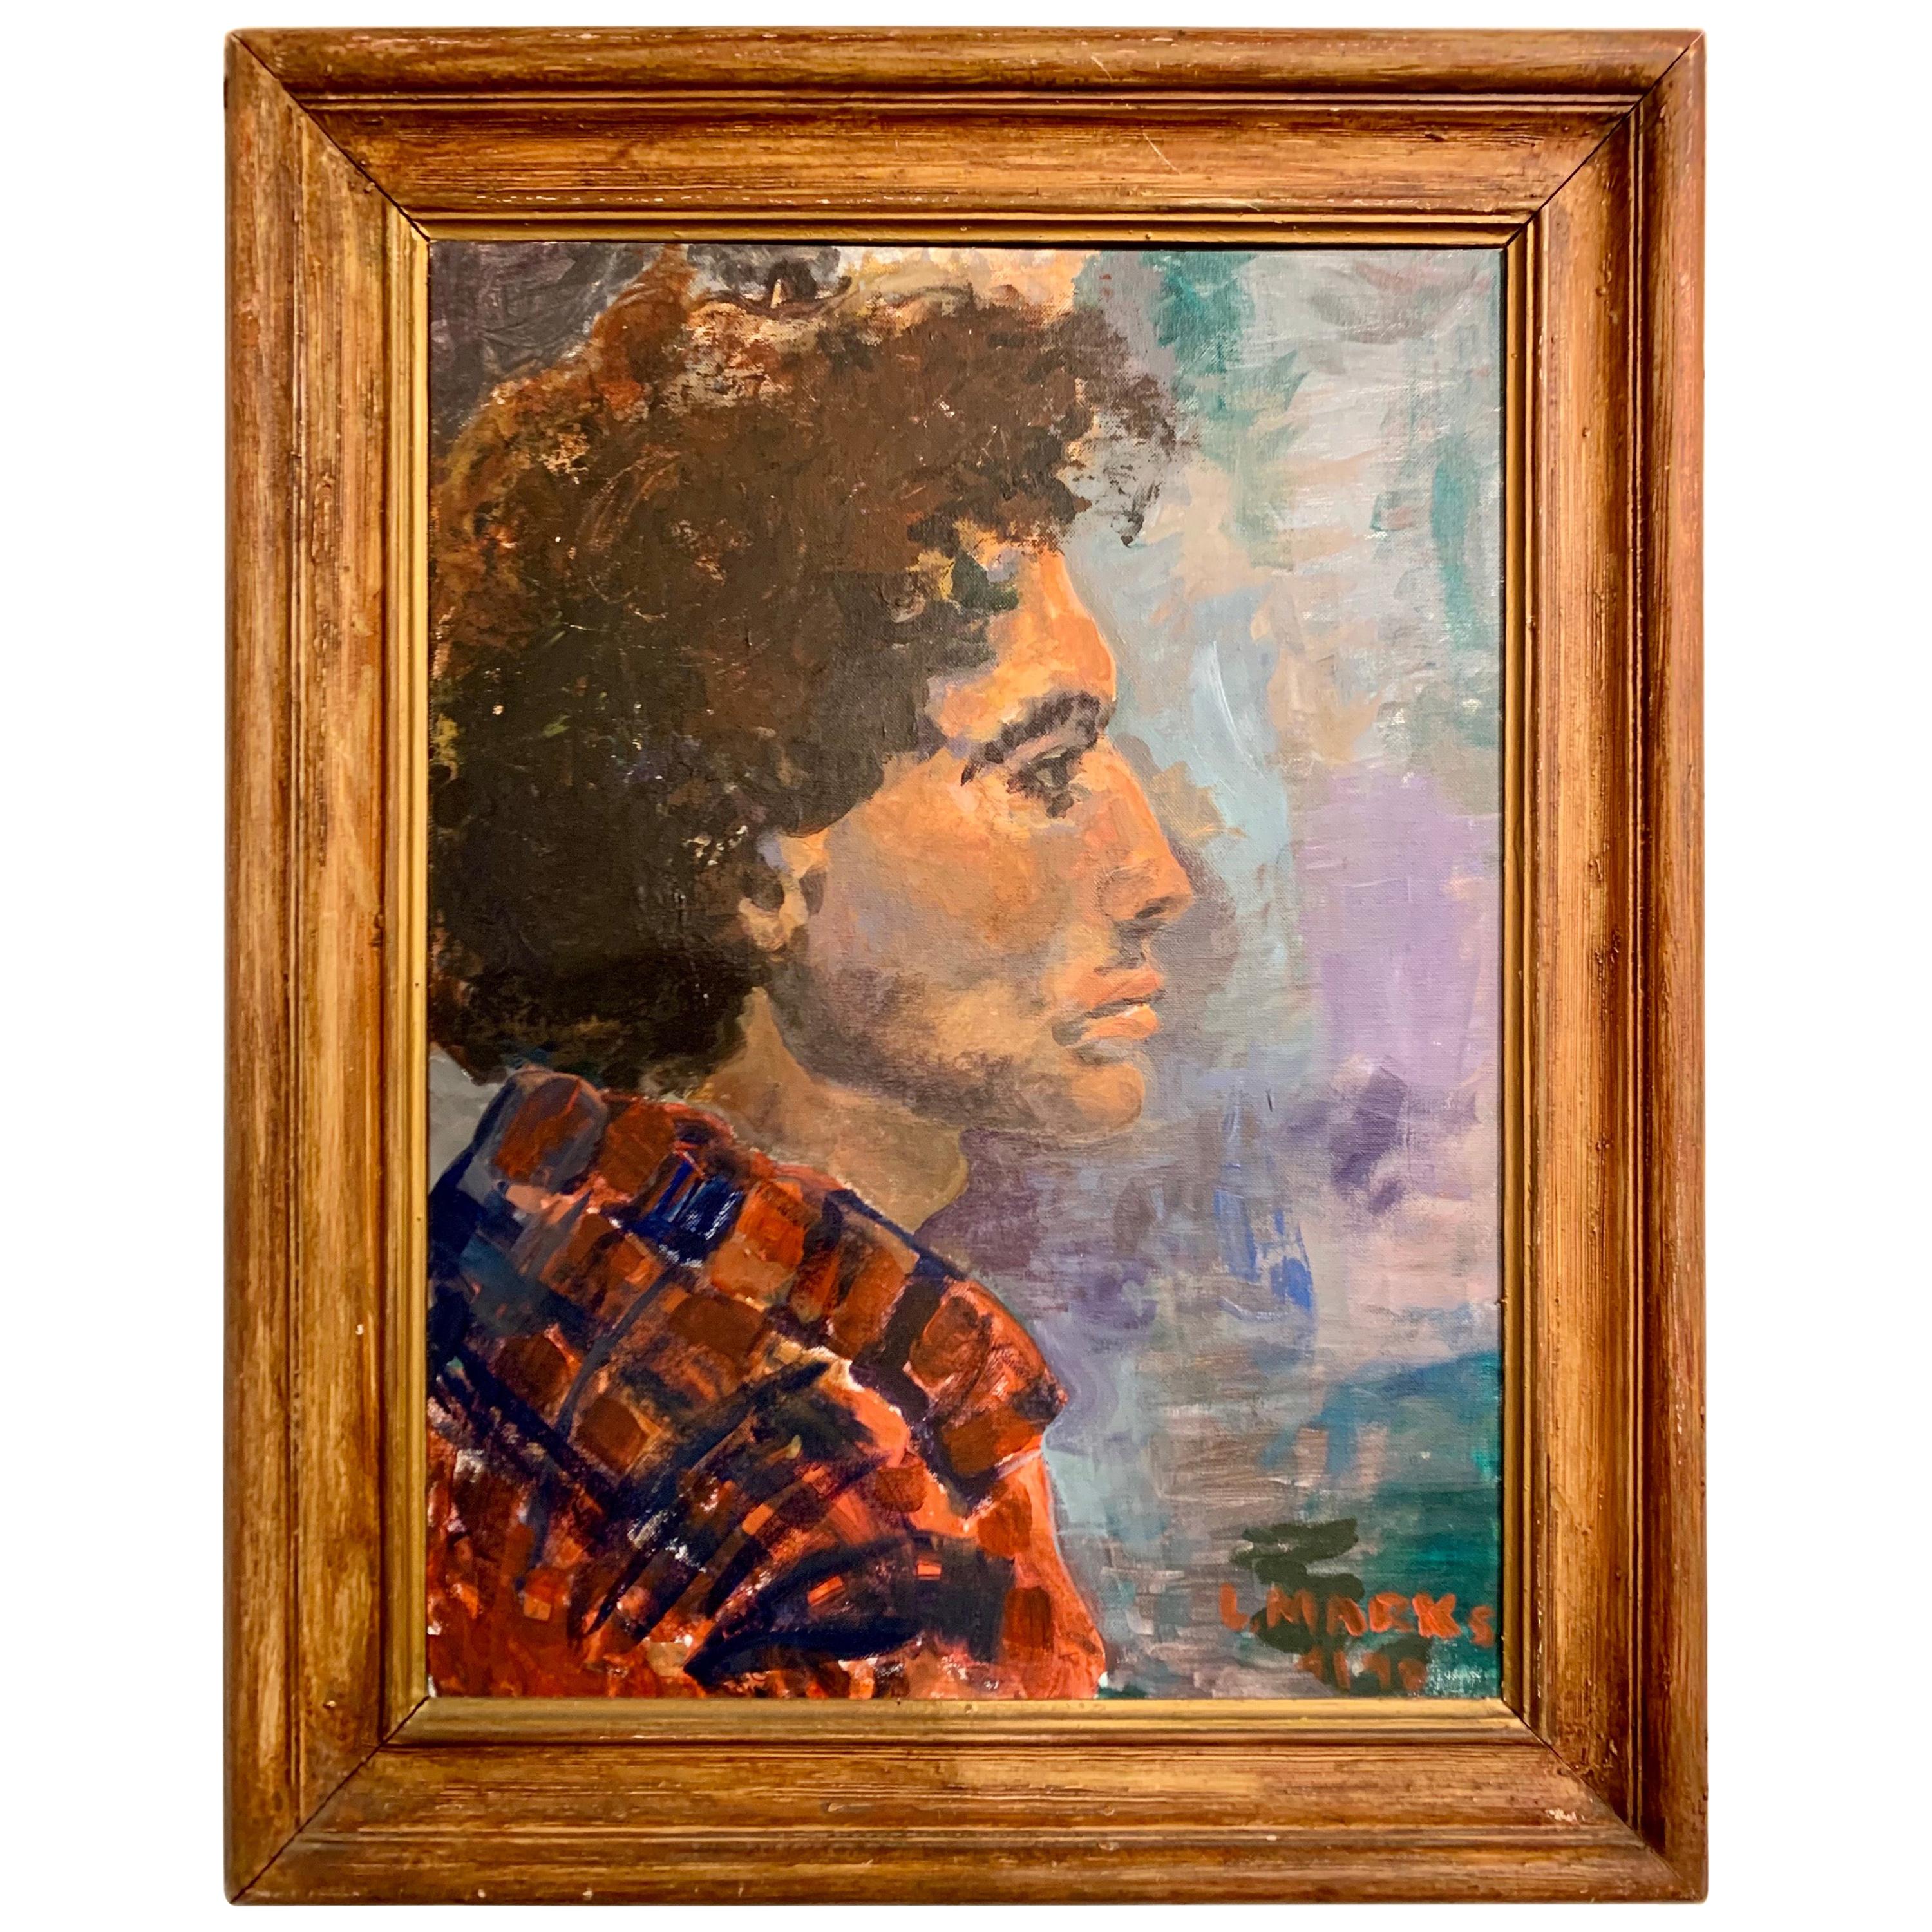 Original L. Marks Signed Oil Painting, 1979